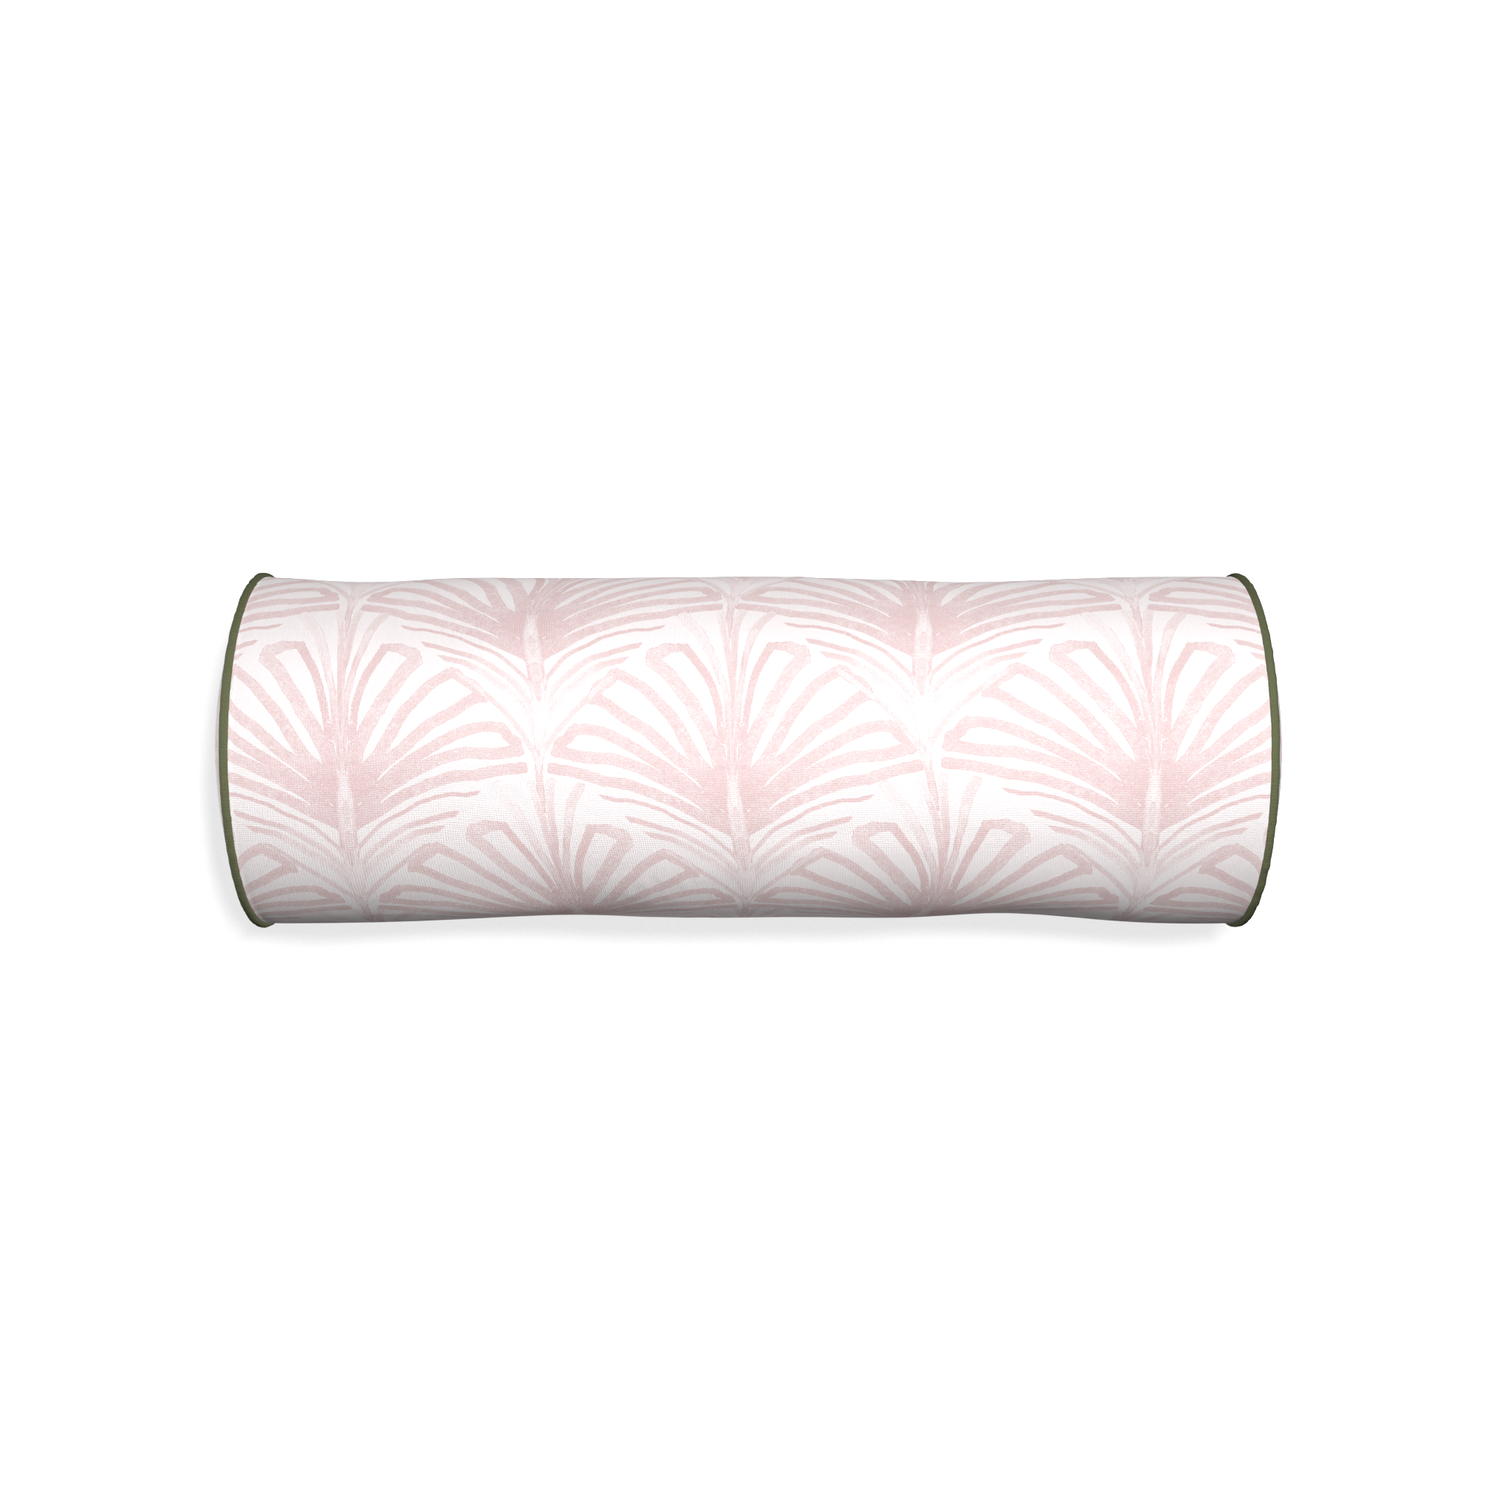 Bolster suzy rose custom rose pink palmpillow with f piping on white background